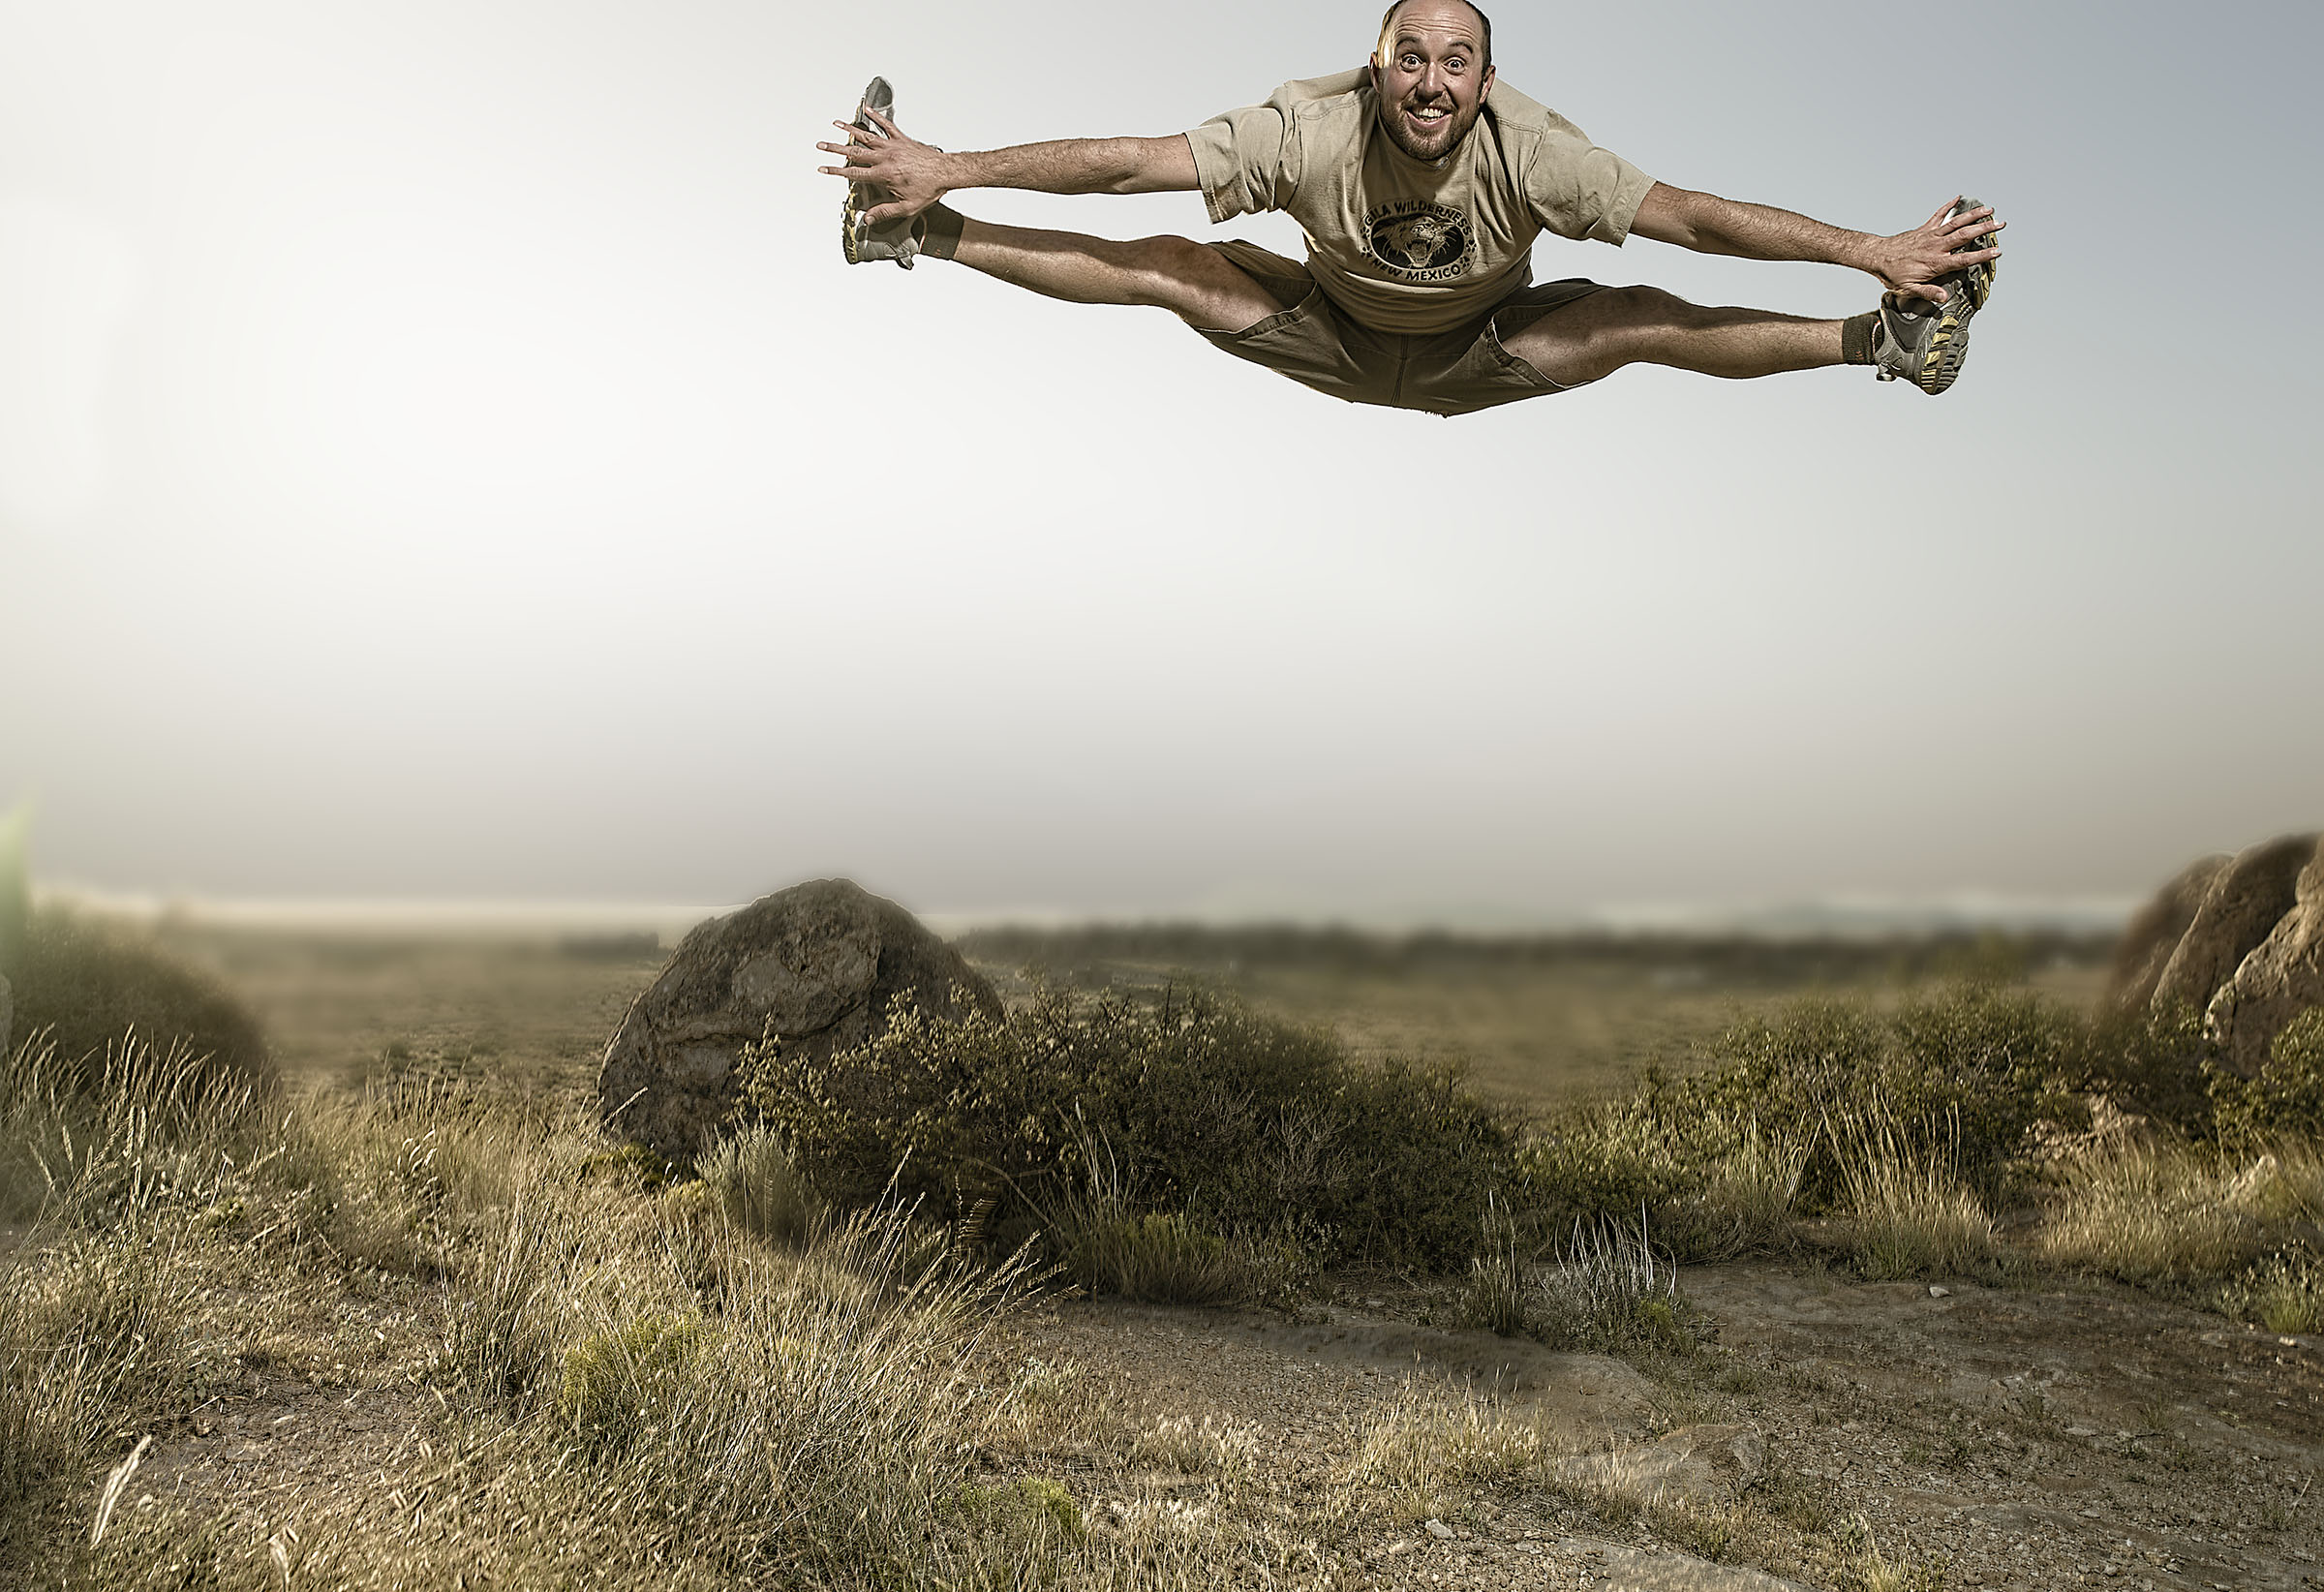 Ari Werber, City of Rocks, for NM Tourism Board, Jumping for Joy!